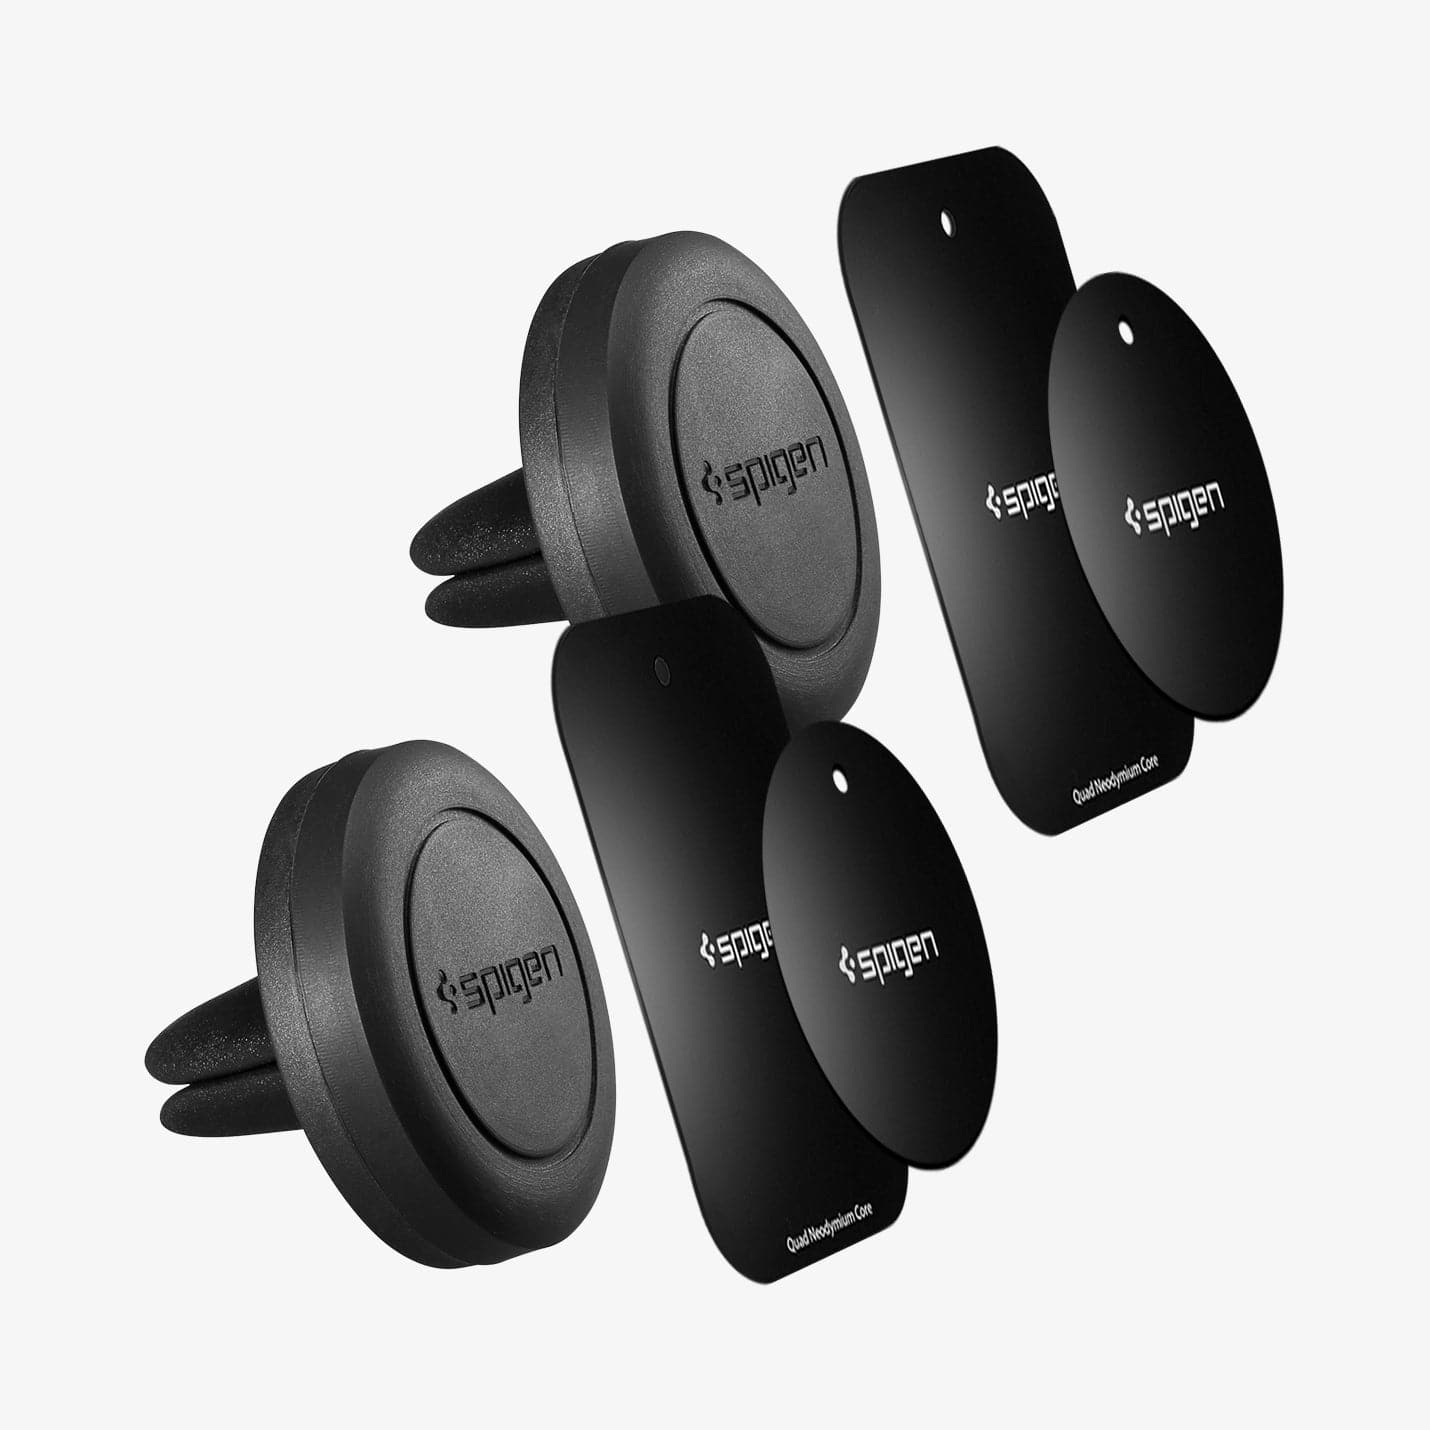 000CD20239 - Q11 Magnetic Air Vent Car Mount 2 pack showing the rectangle plate, circle plate and car mount